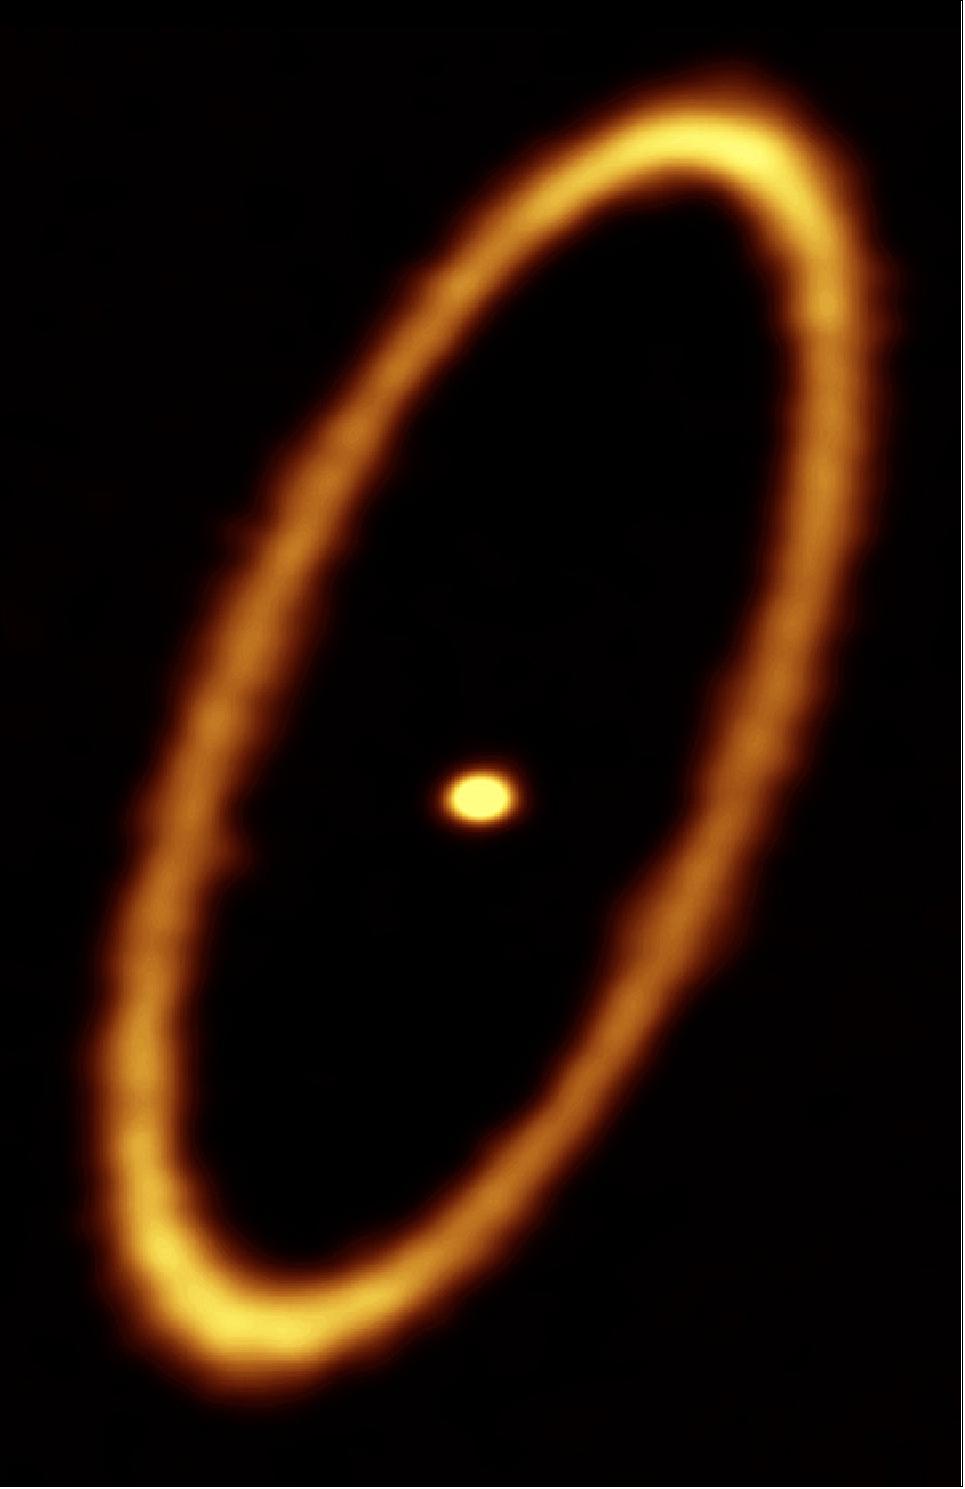 Figure 34: ALMA image of the debris disk in the Fomalhaut star system. The ring is approximately 20 billion kilometers from the central star and it is about 2 billion kilometers wide. The central dot is the unresolved emission from the star, which is about twice the mass of the Sun (image credit: ALMA (ESO/NAOJ/NRAO); M. MacGregor)